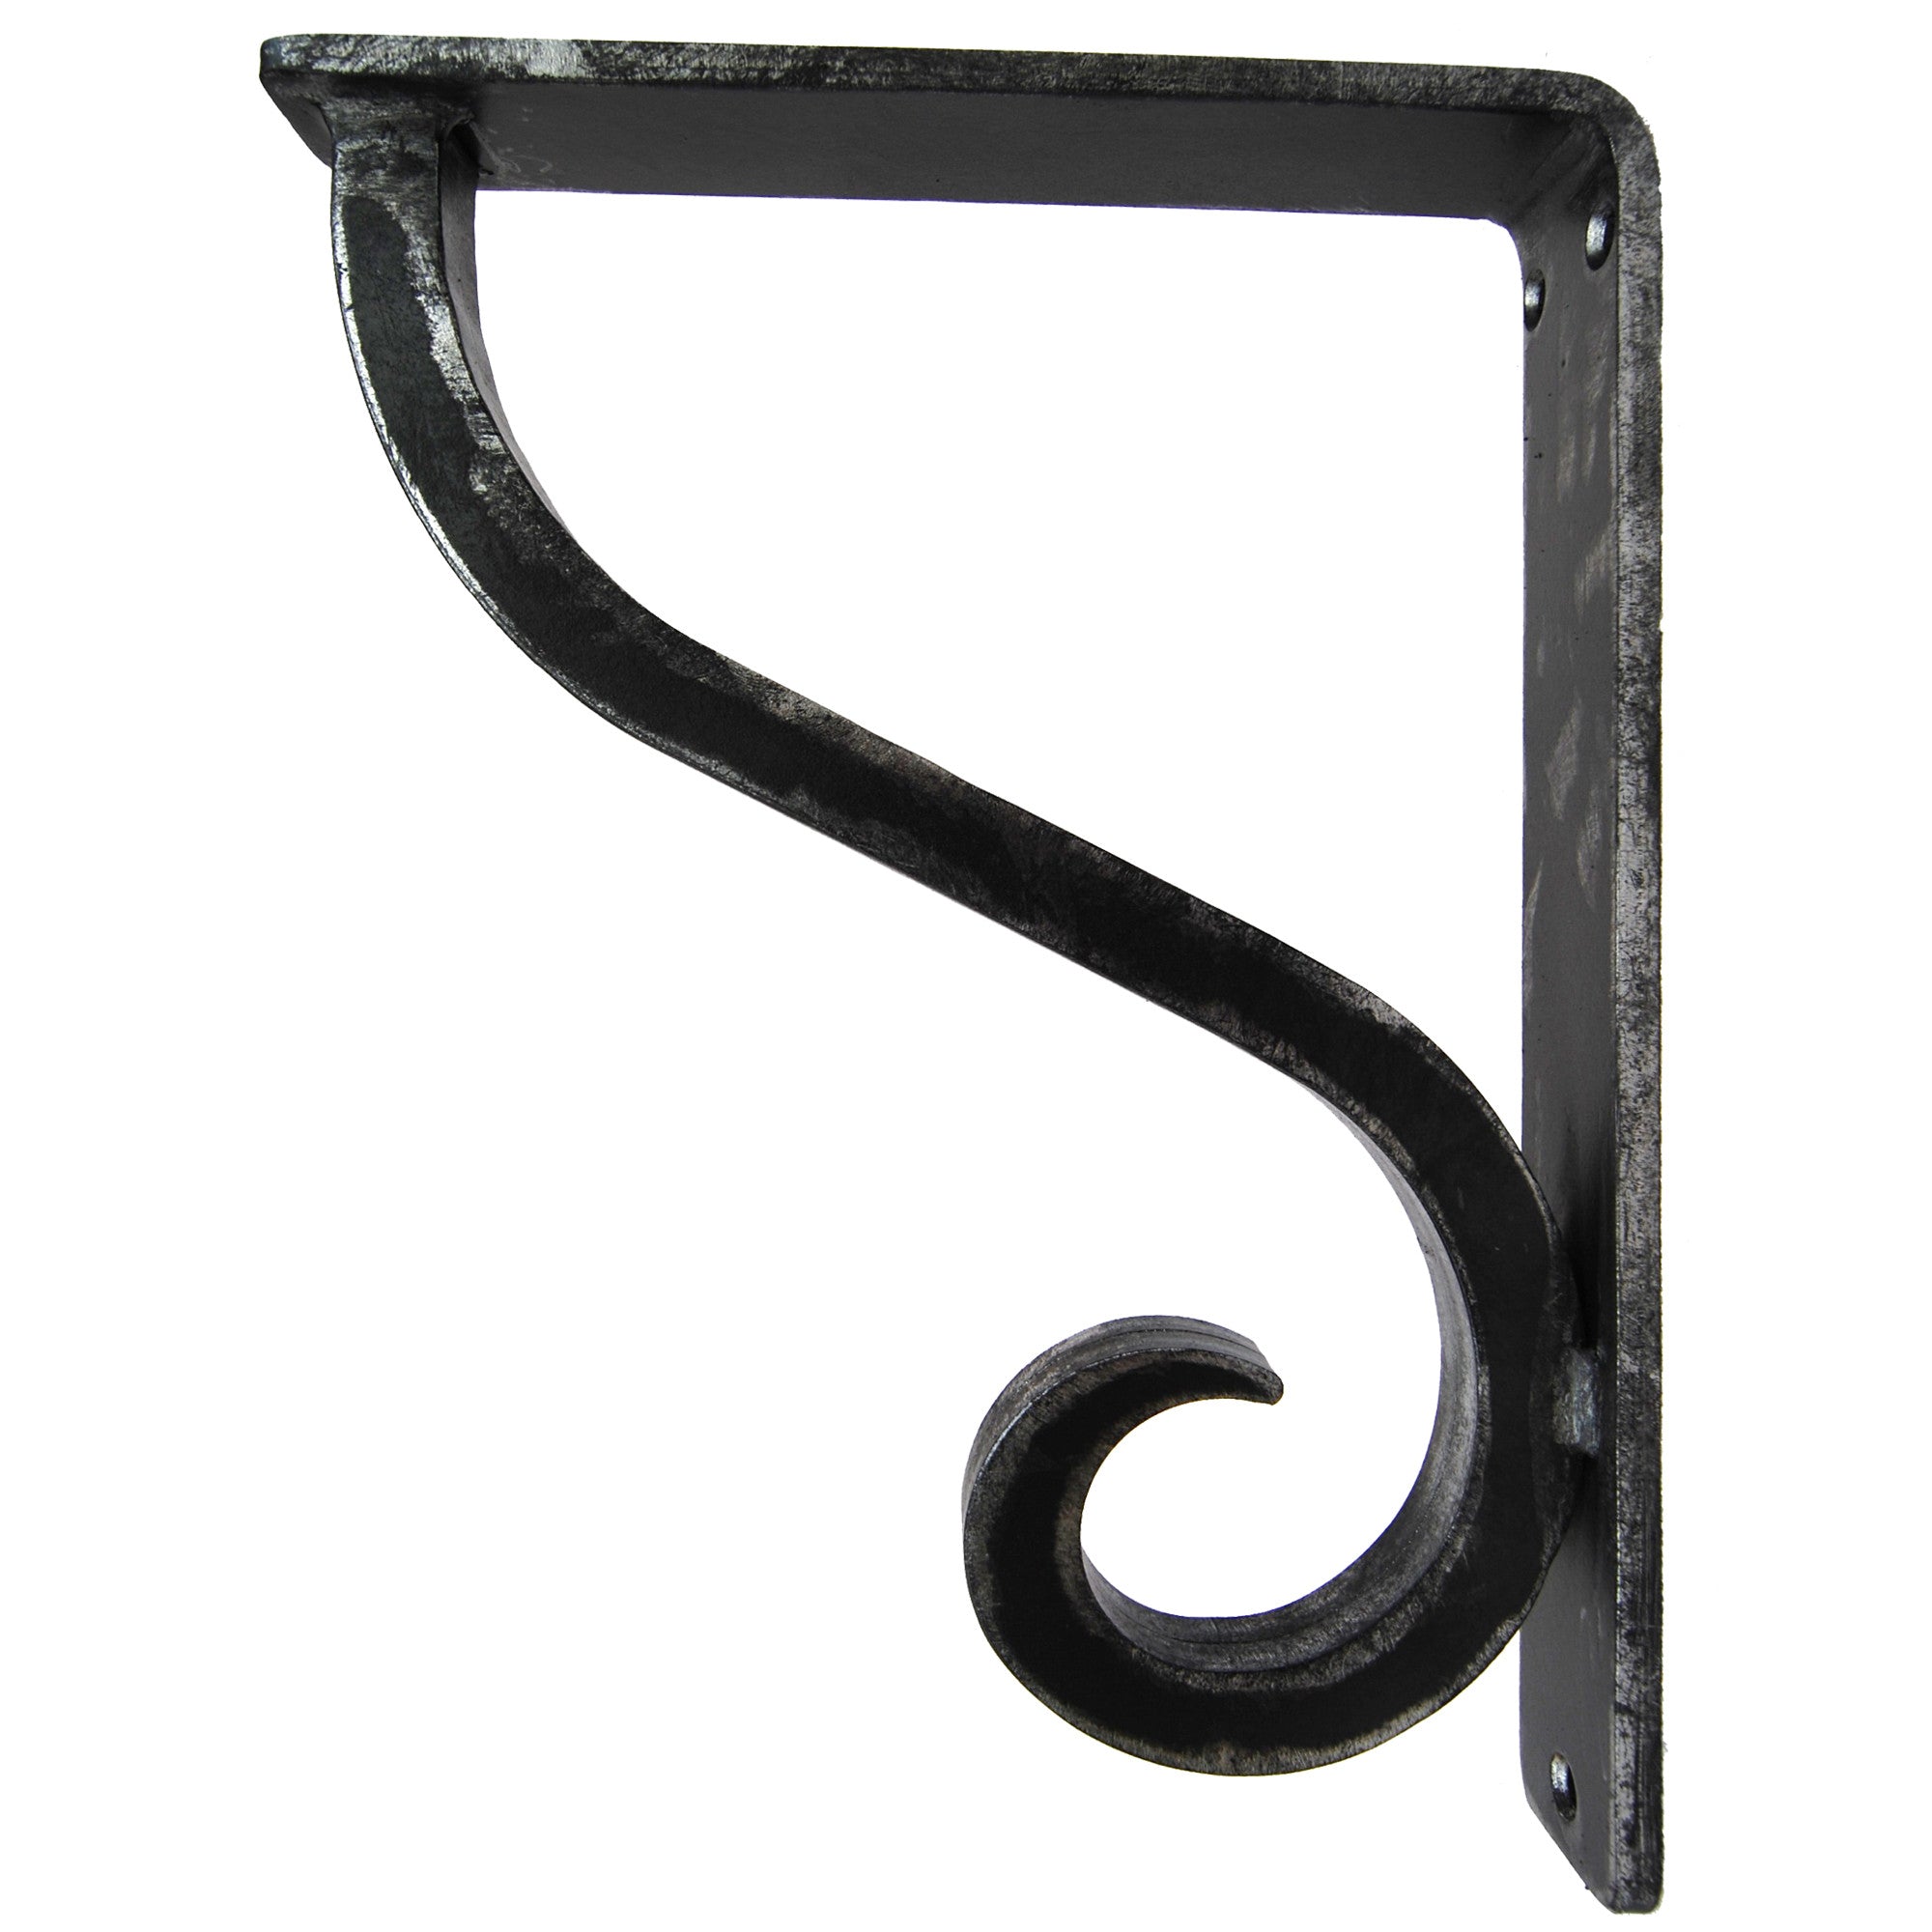 Pictured is the 1.5-inch wide camden iron corbel with antique pewter finish.